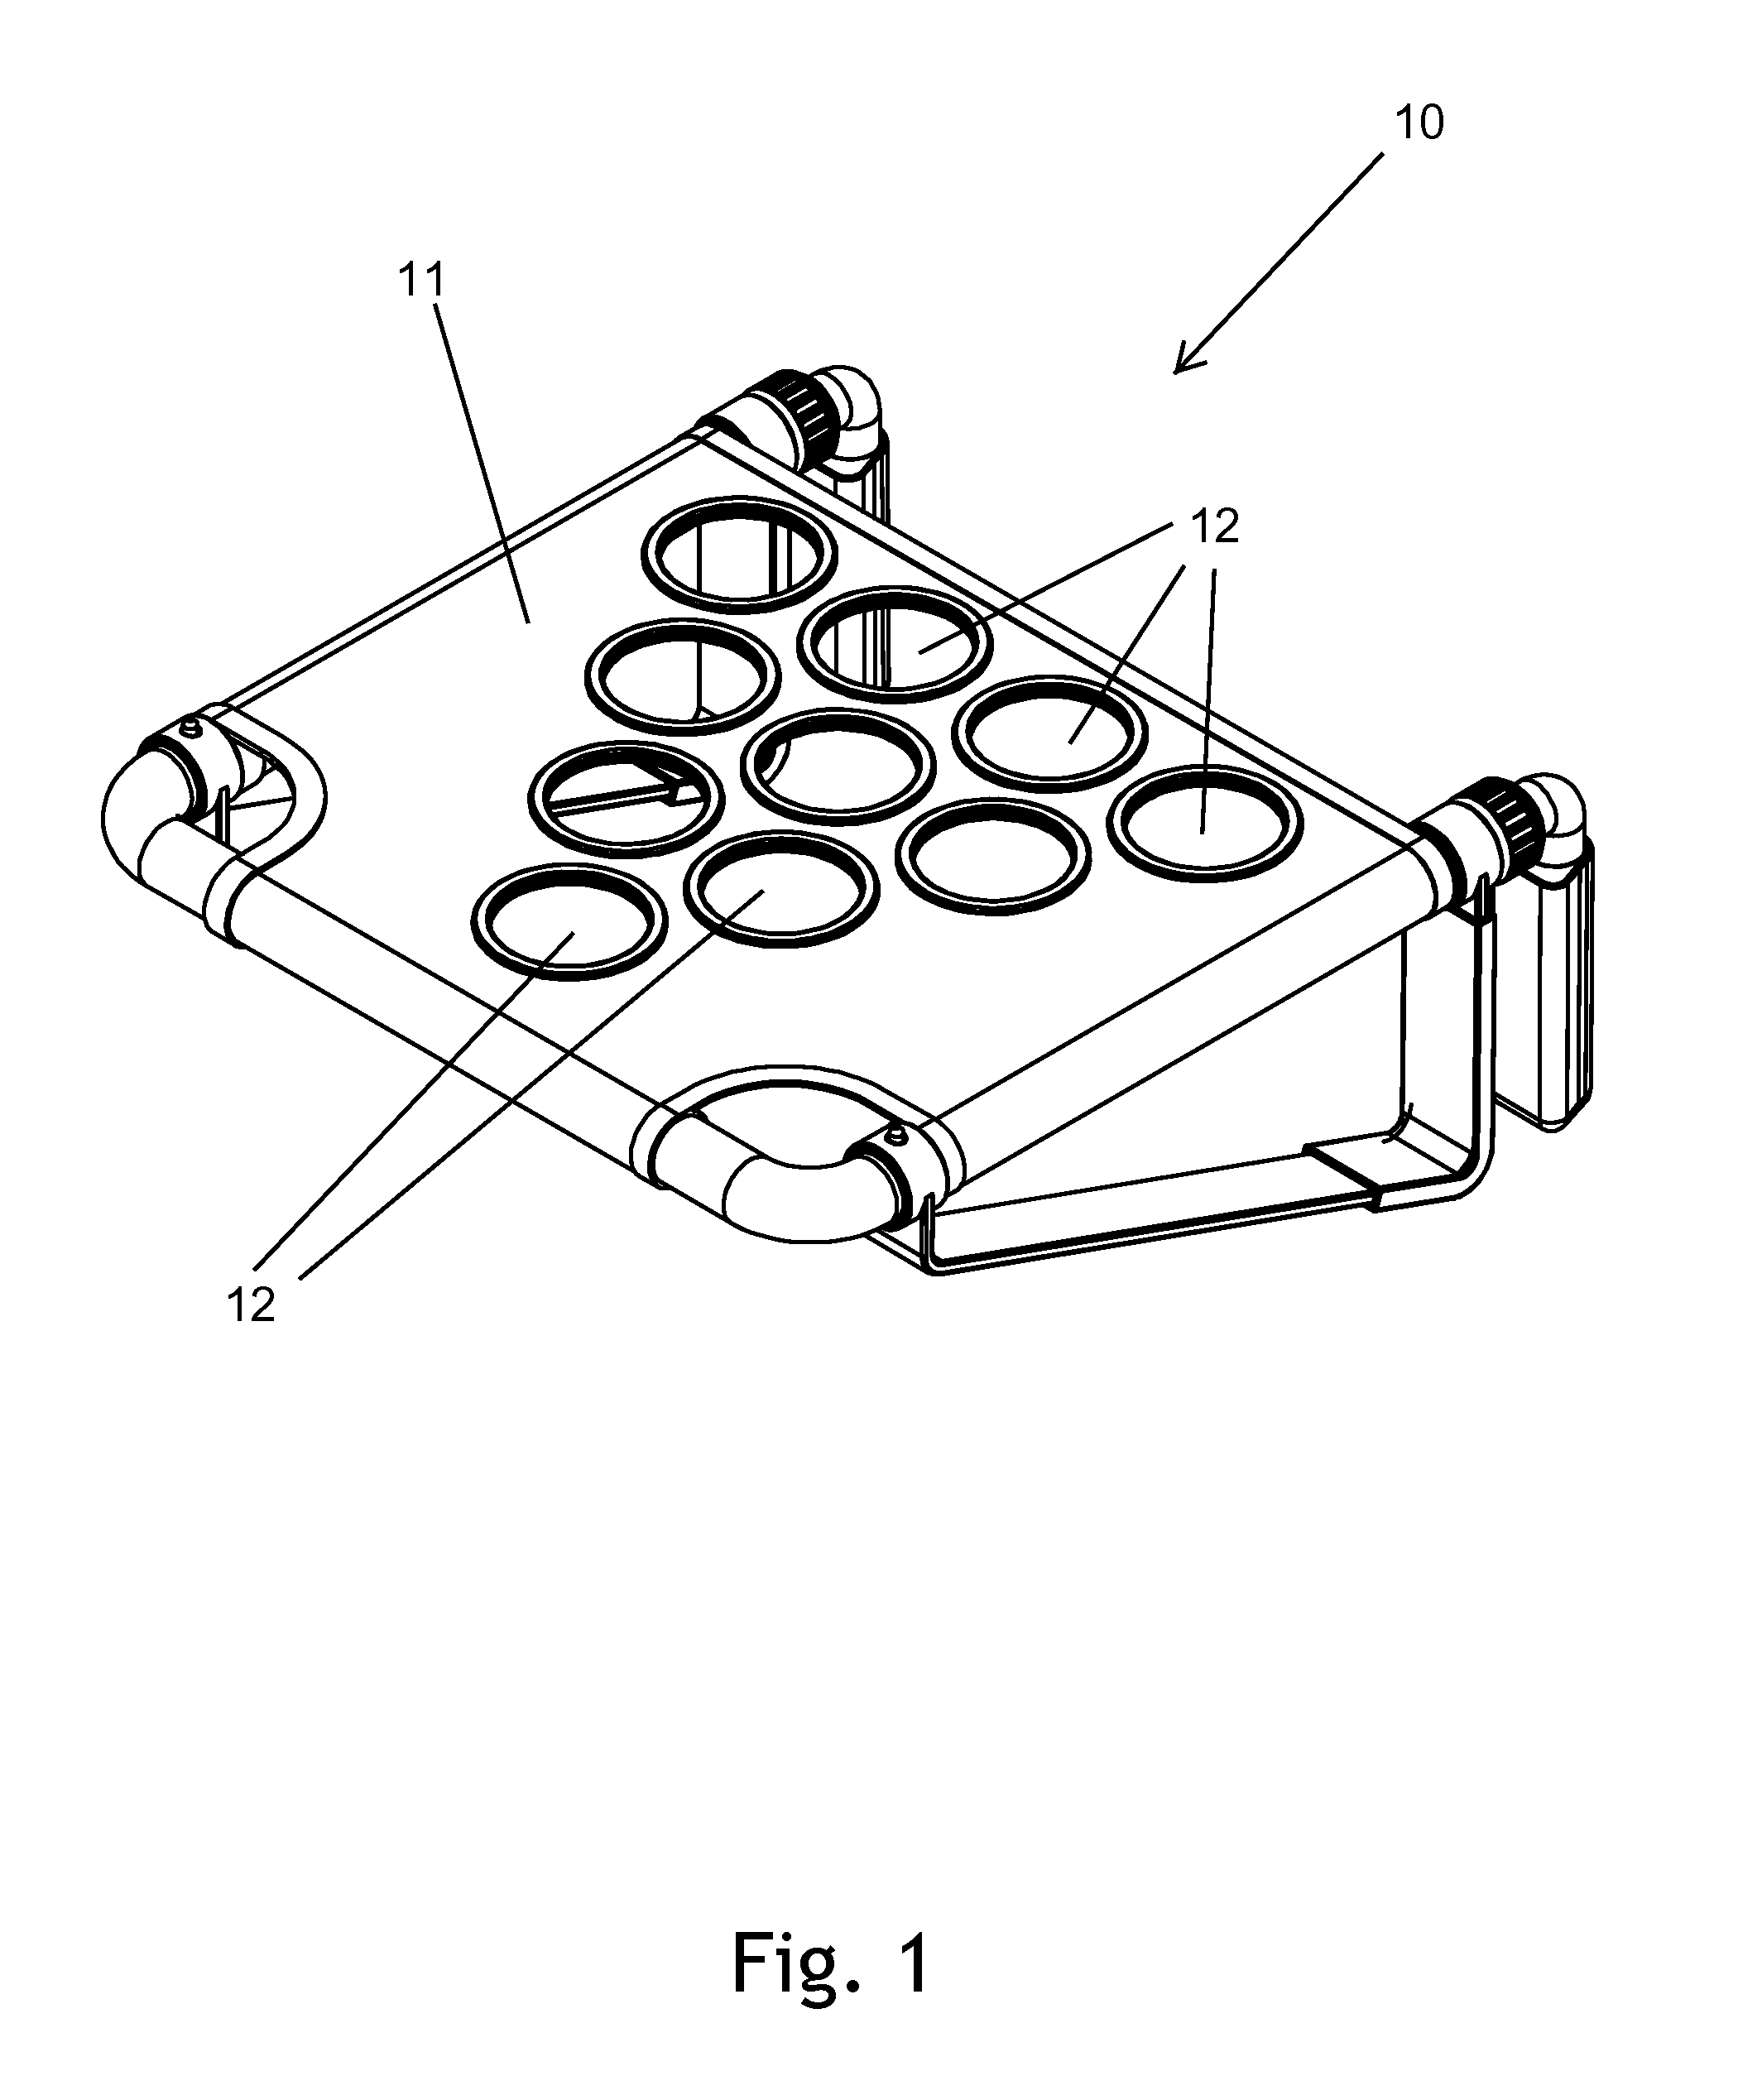 Portable beer pong apparatus and associated method